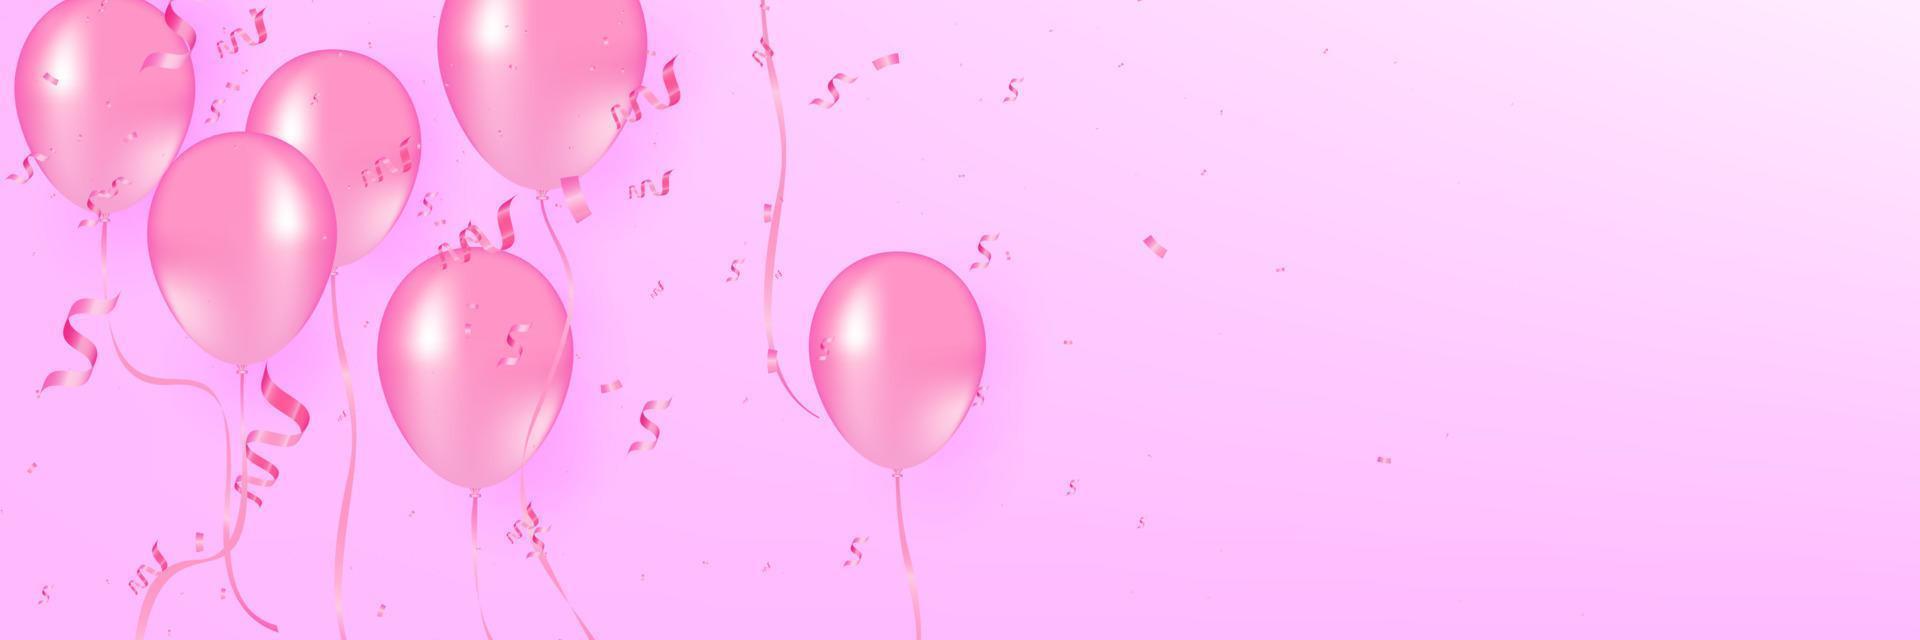 Soft red balloons with confetti realistic vector illustration. Pink balloons vector background. Pink Balloons and confetti can be use party, celebration and holidays.